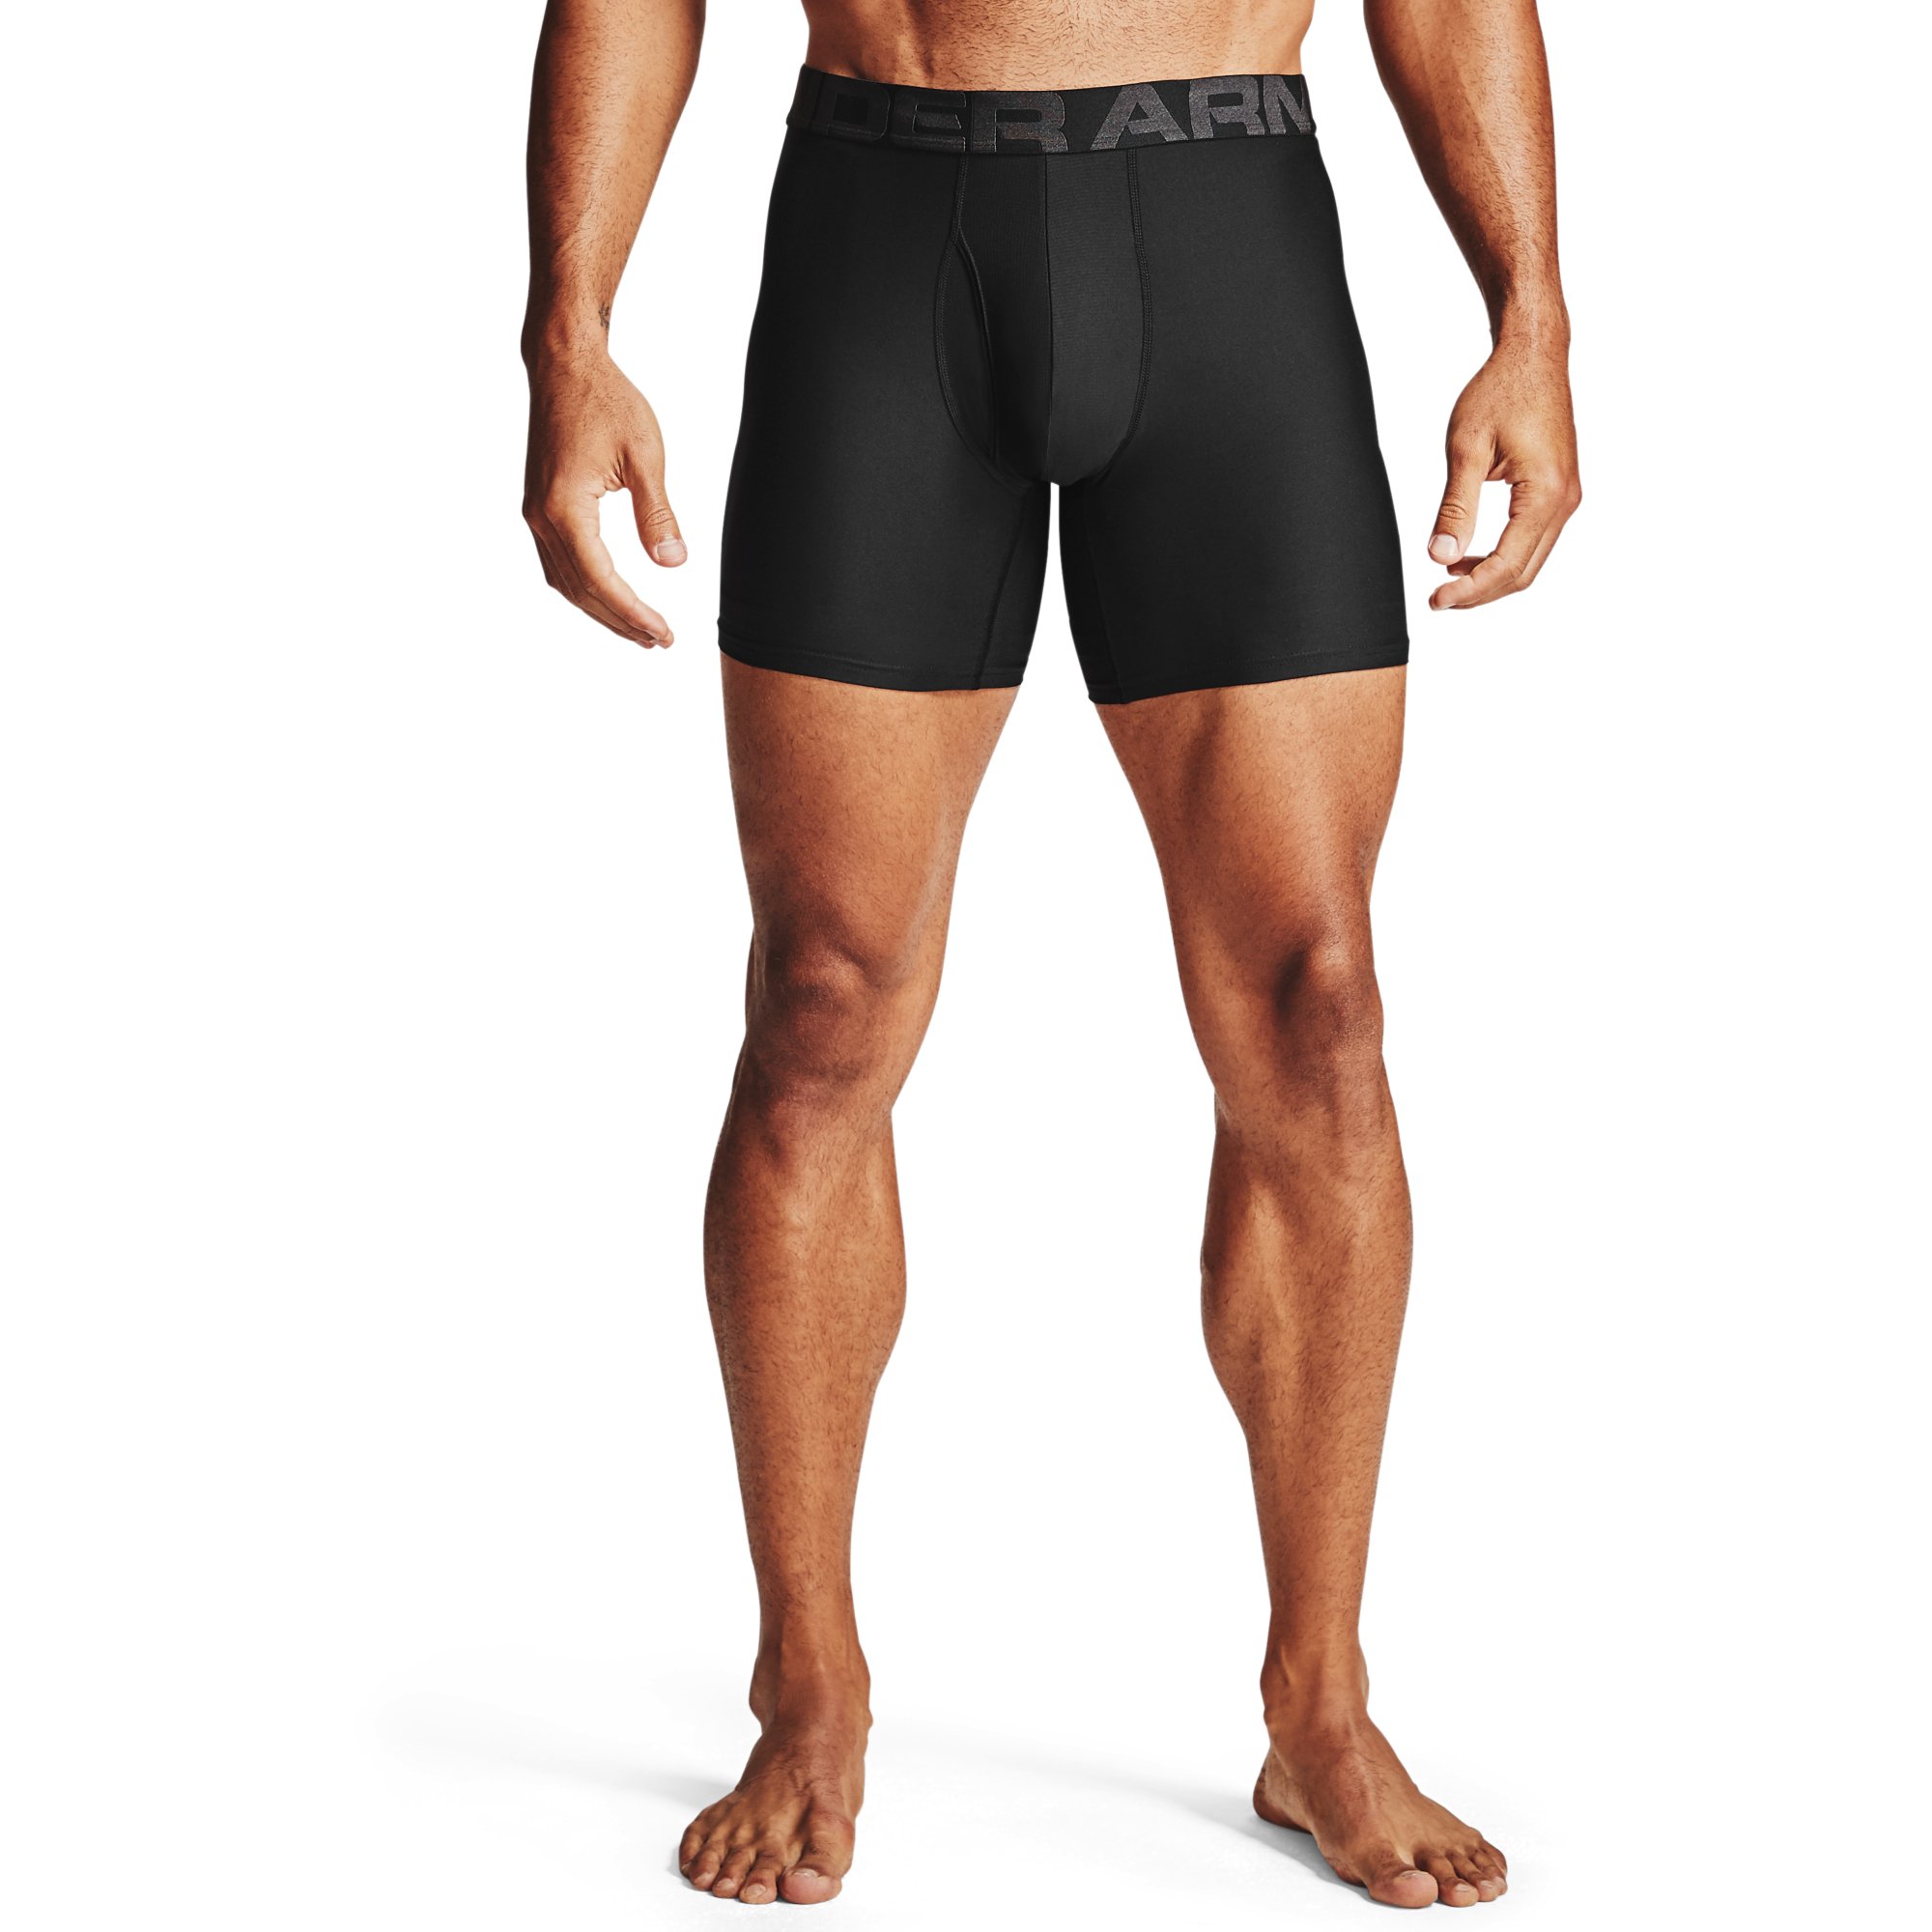 Boxerky Under Armour Tech 6In 2 Pack Black